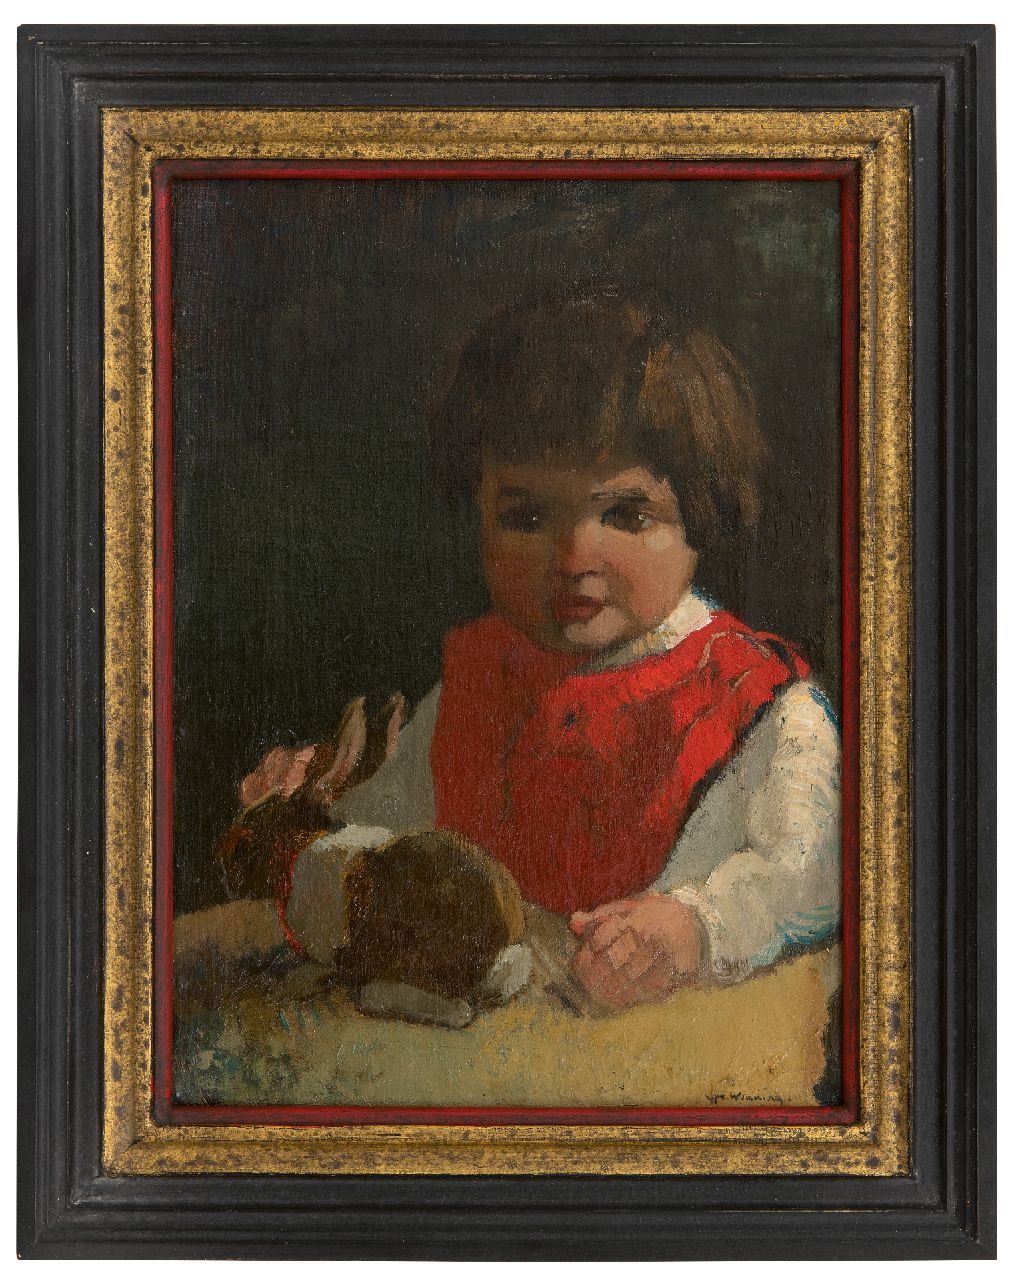 Wenning IJ.H.  | IJpe Heerke 'Ype' Wenning | Paintings offered for sale | A girl with her pat rabbit, oil on canvas 36.4 x 26.2 cm, signed l.r.